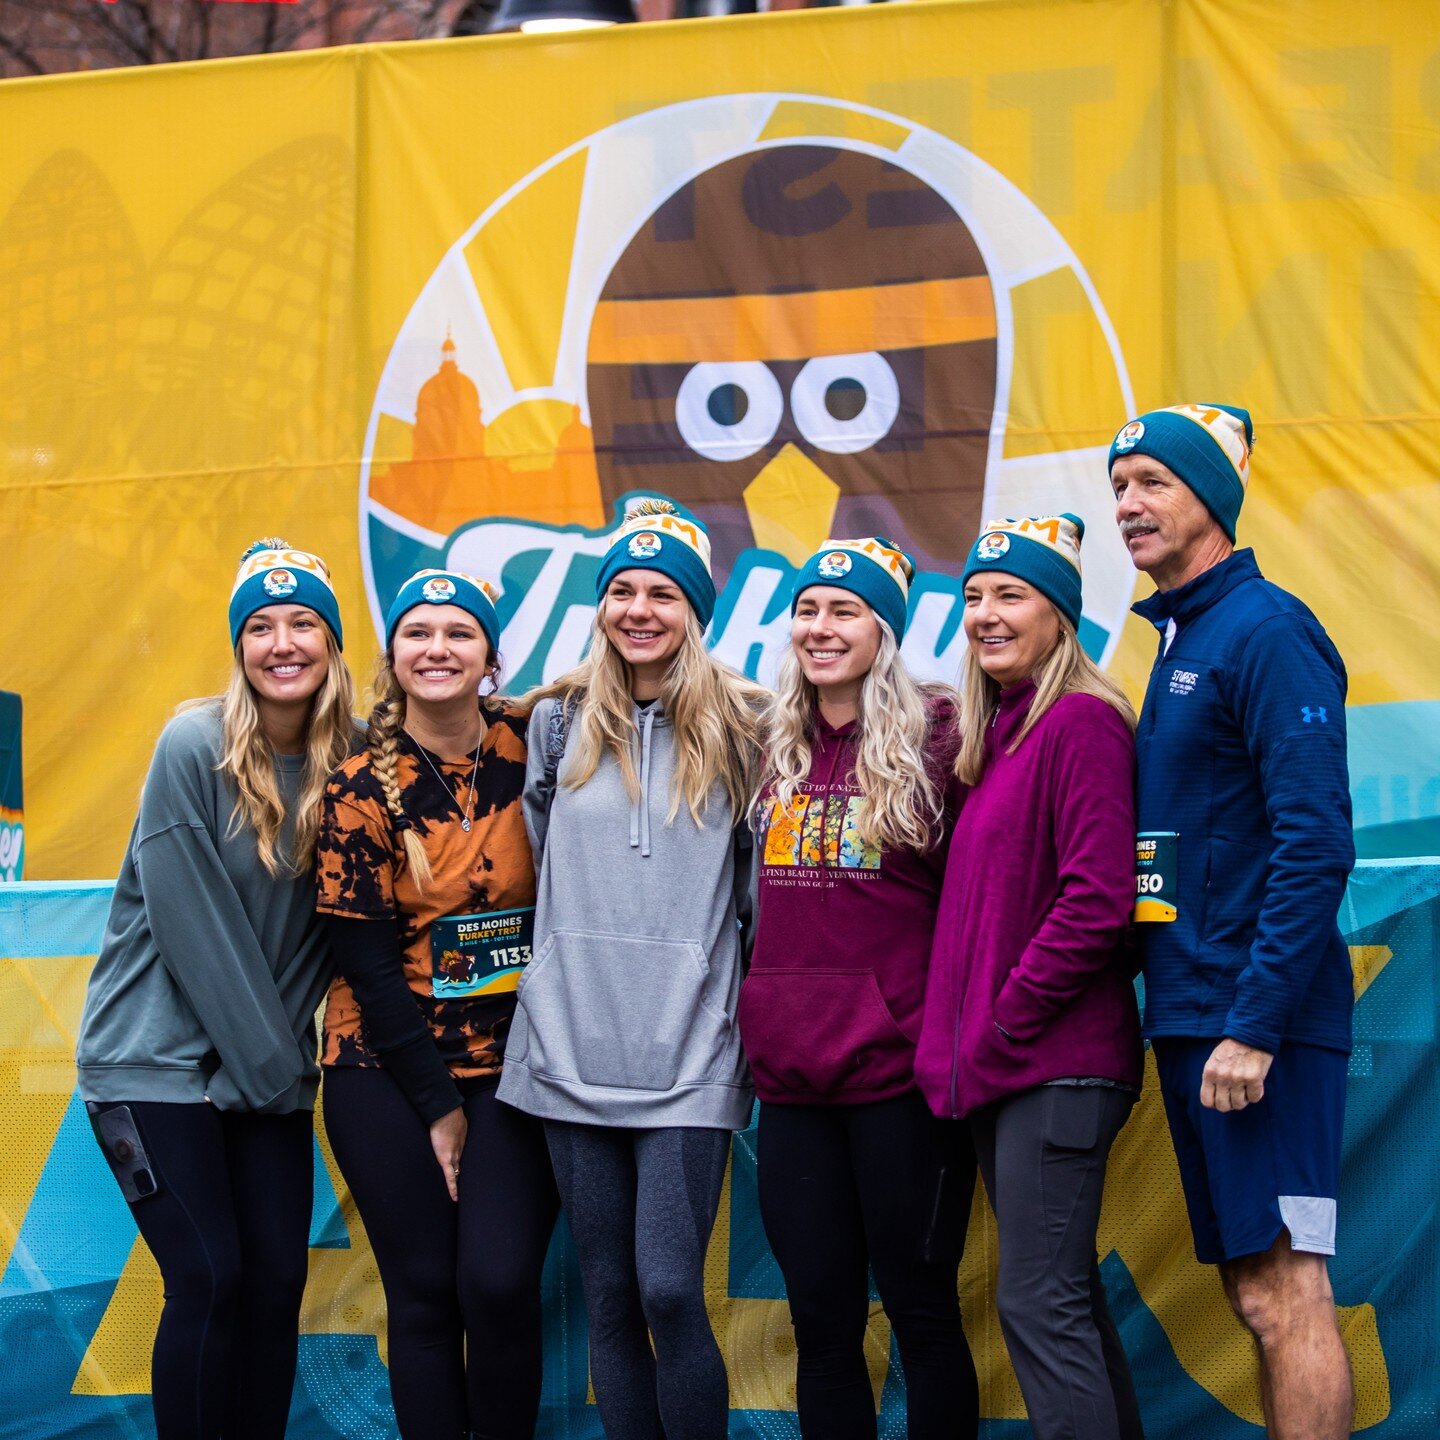 Check out photos of the 2022 Des Moines Turkey Trot from our photographer @architrujillo! 

We were thankful for warm weather to bring out more of your uncovered smiles on race day!

 🔗 📸 Full gallery link is available in bio #trotdsm